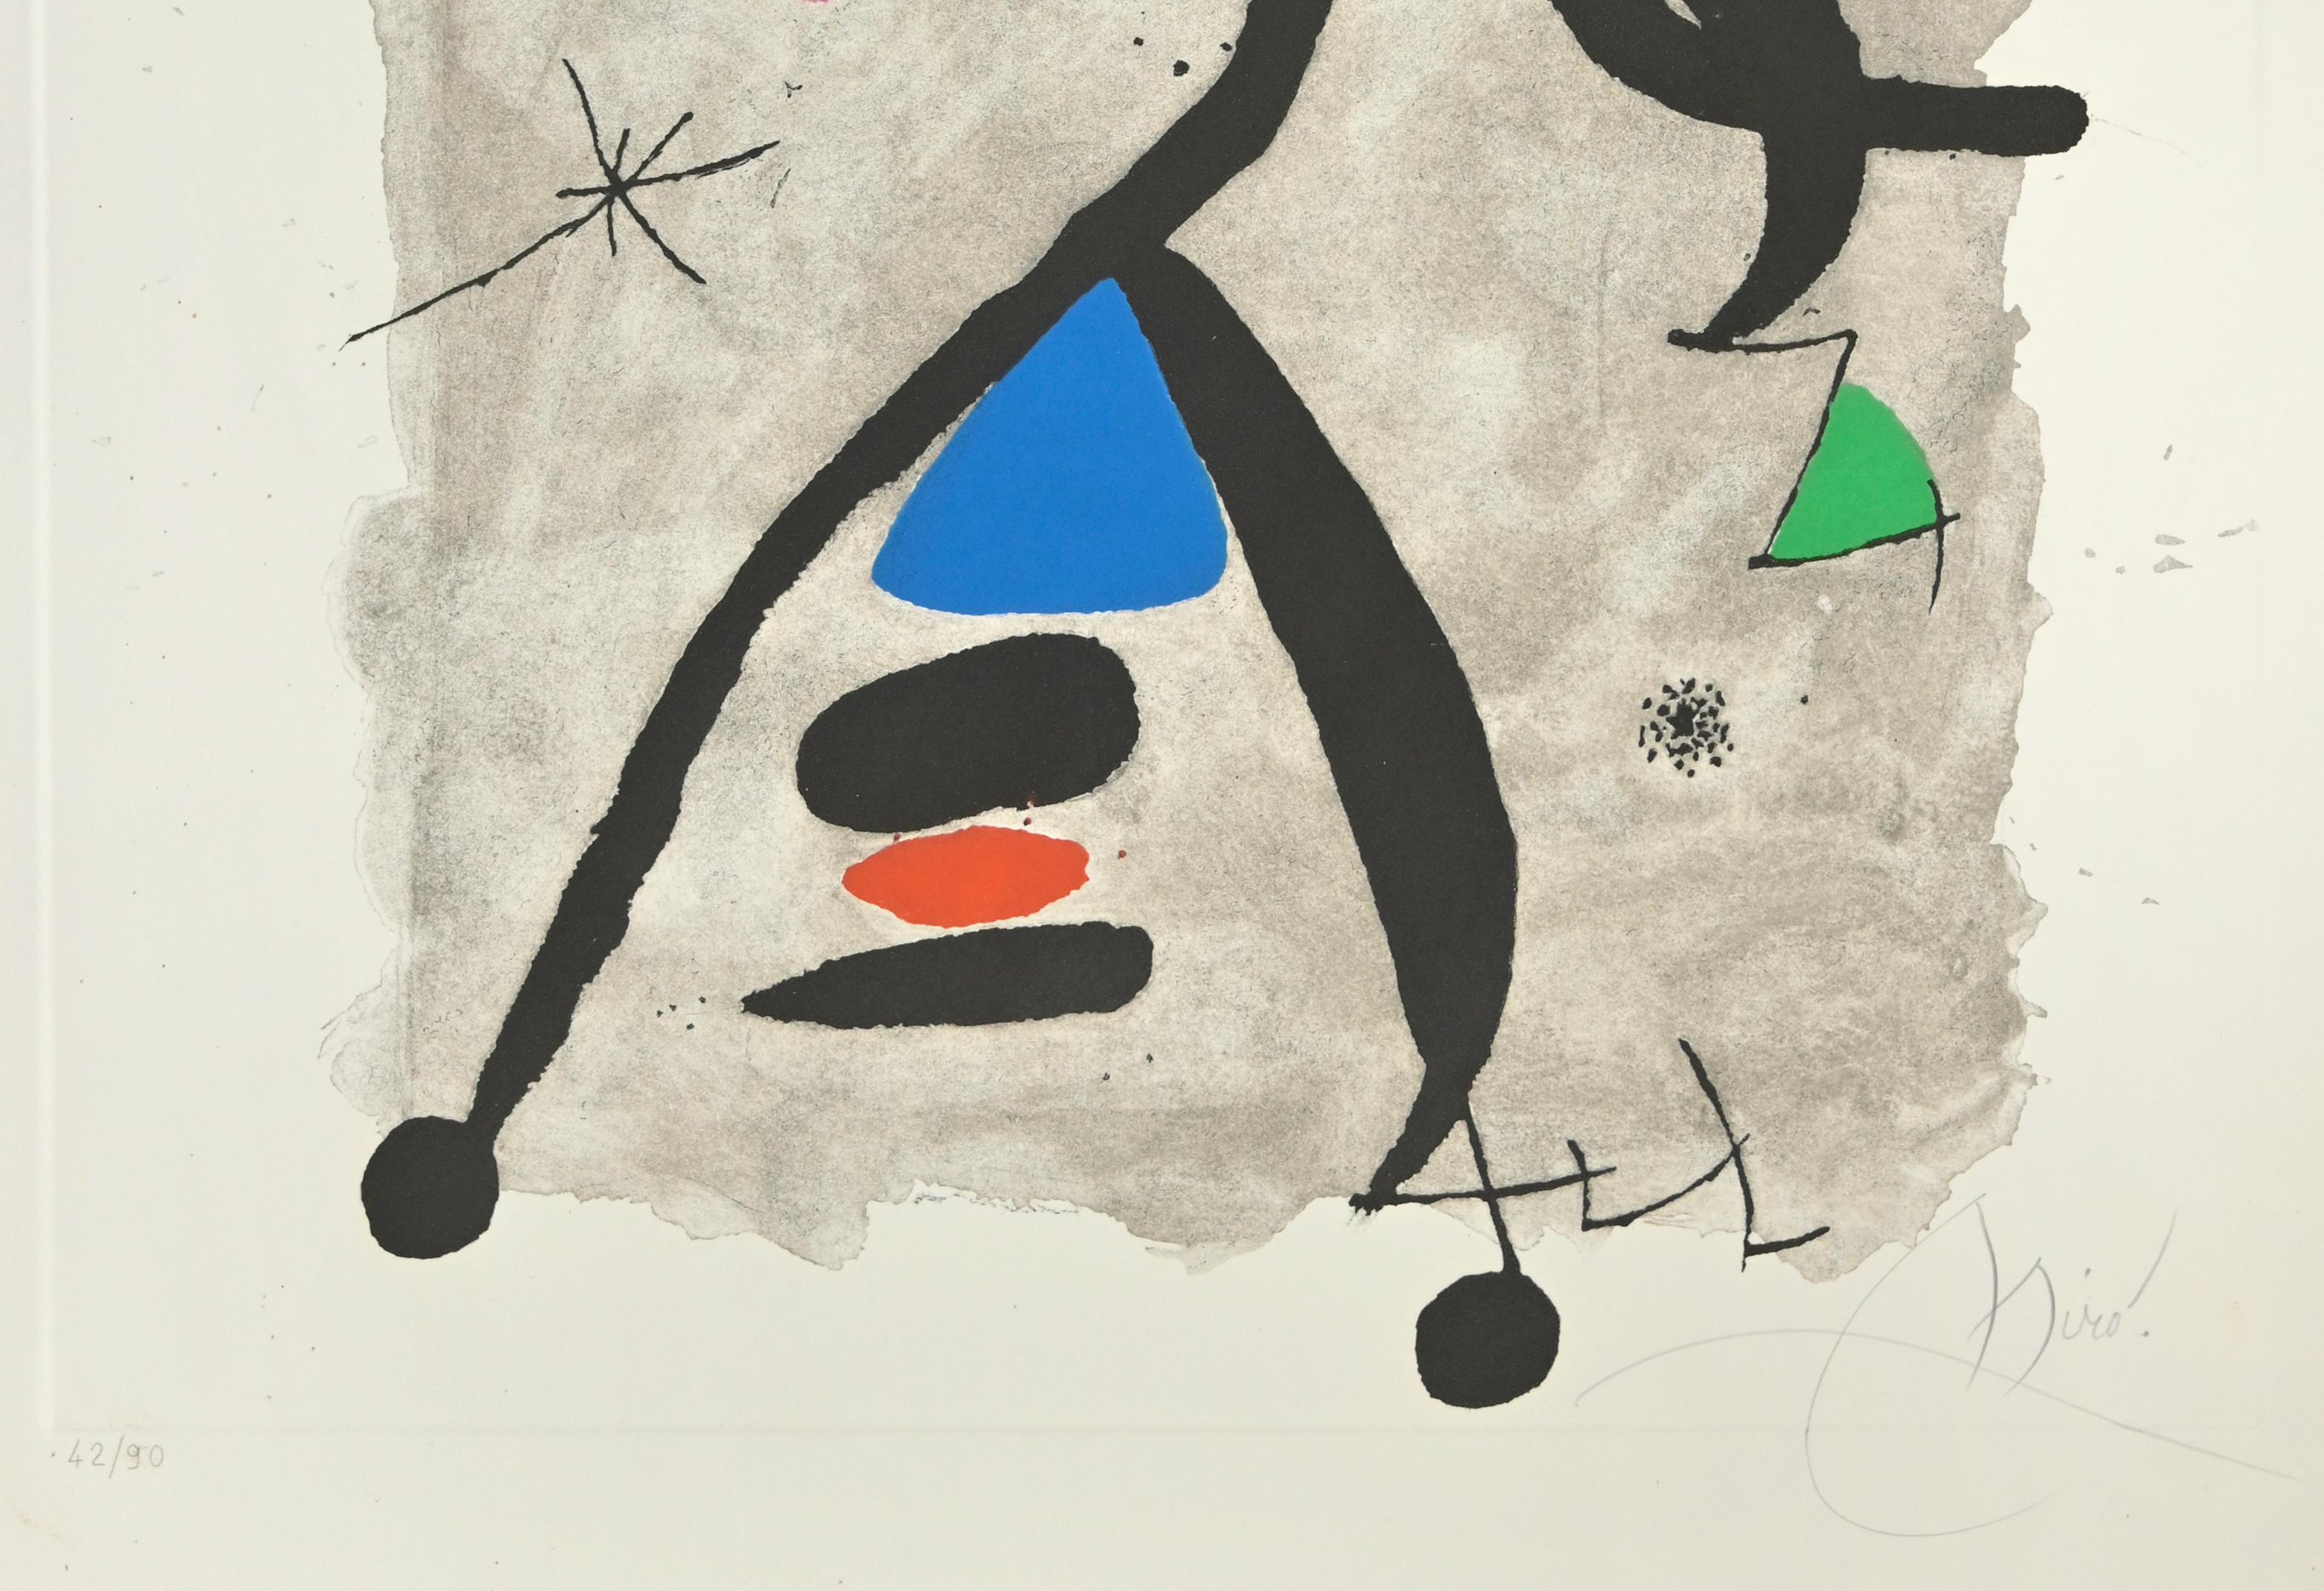 For Alberti, For Spain - Etching by Joan Mirò - 1975 - Surrealist Print by Joan Miró